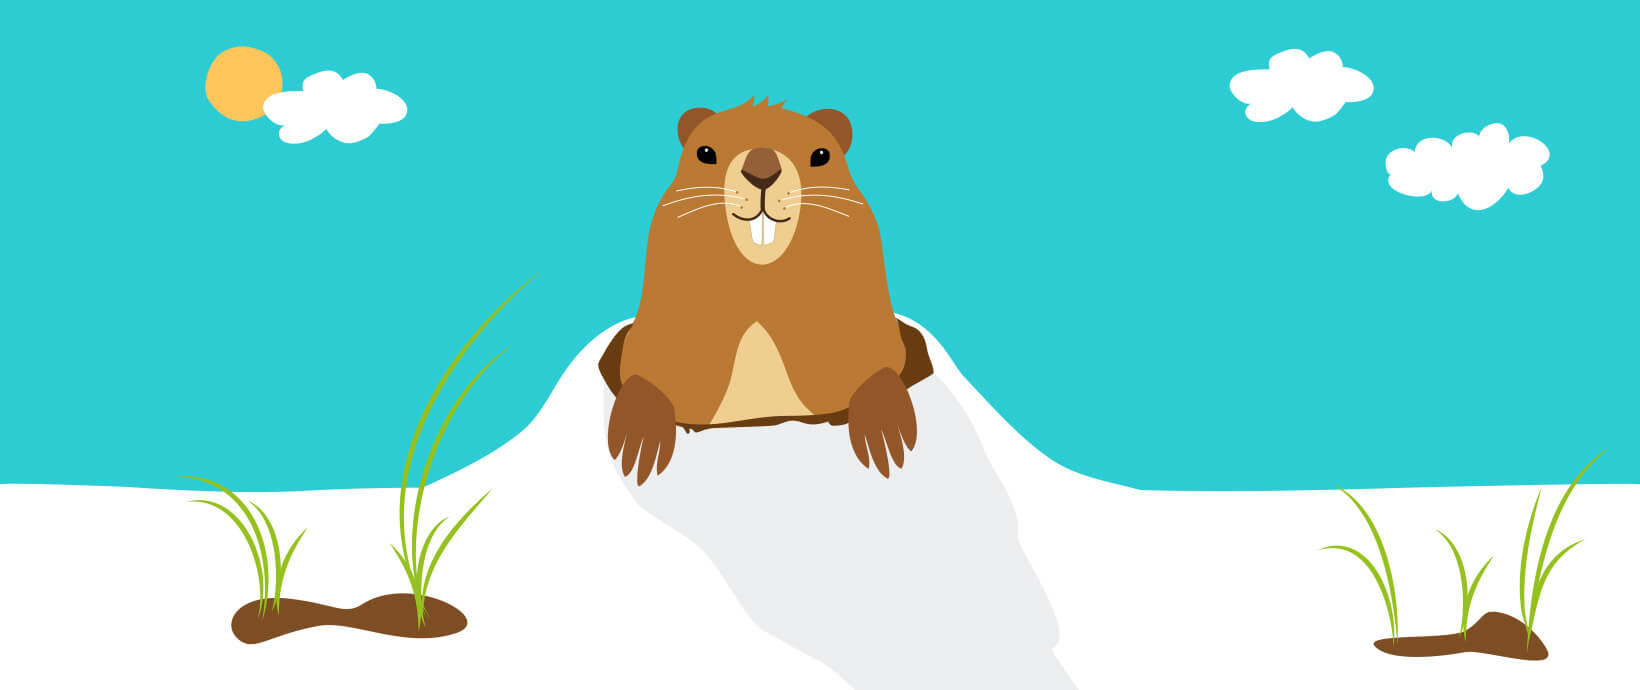 Digital Debunking: Was Data Analytics Able to Predict if Punxsutawney Phil Would See His Shadow?